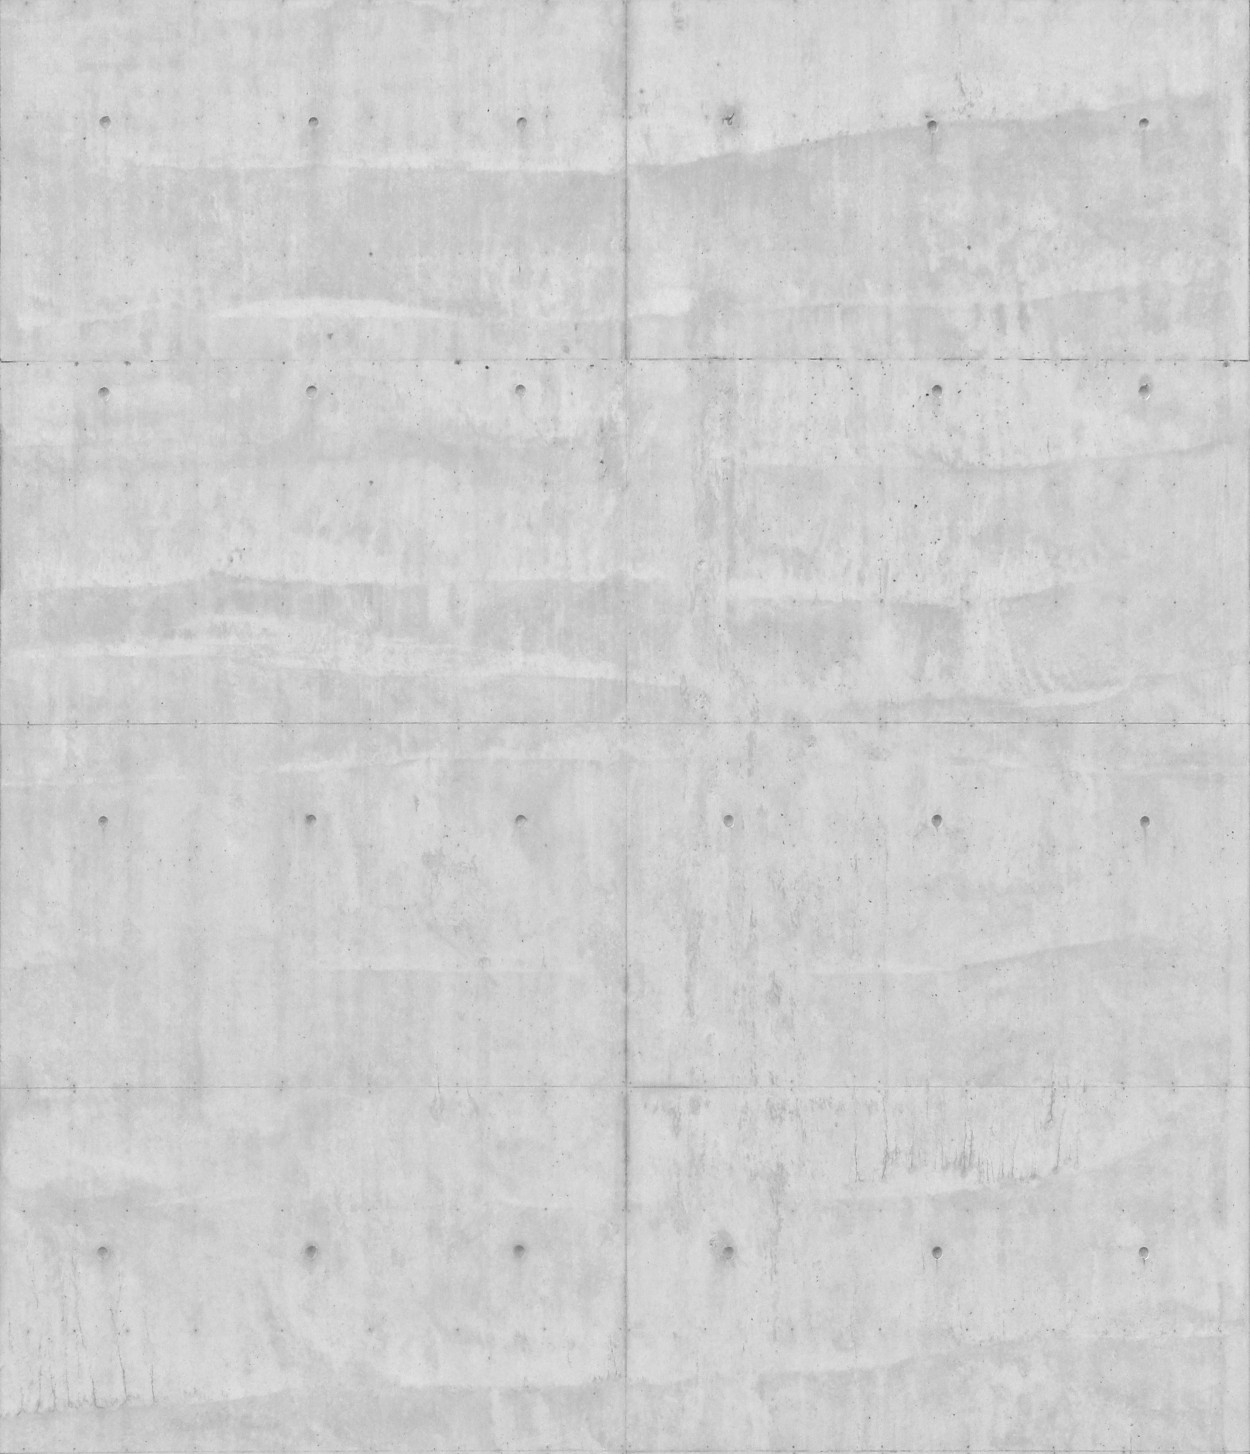 A seamless concrete wall texture for use in architectural drawings and 3D models